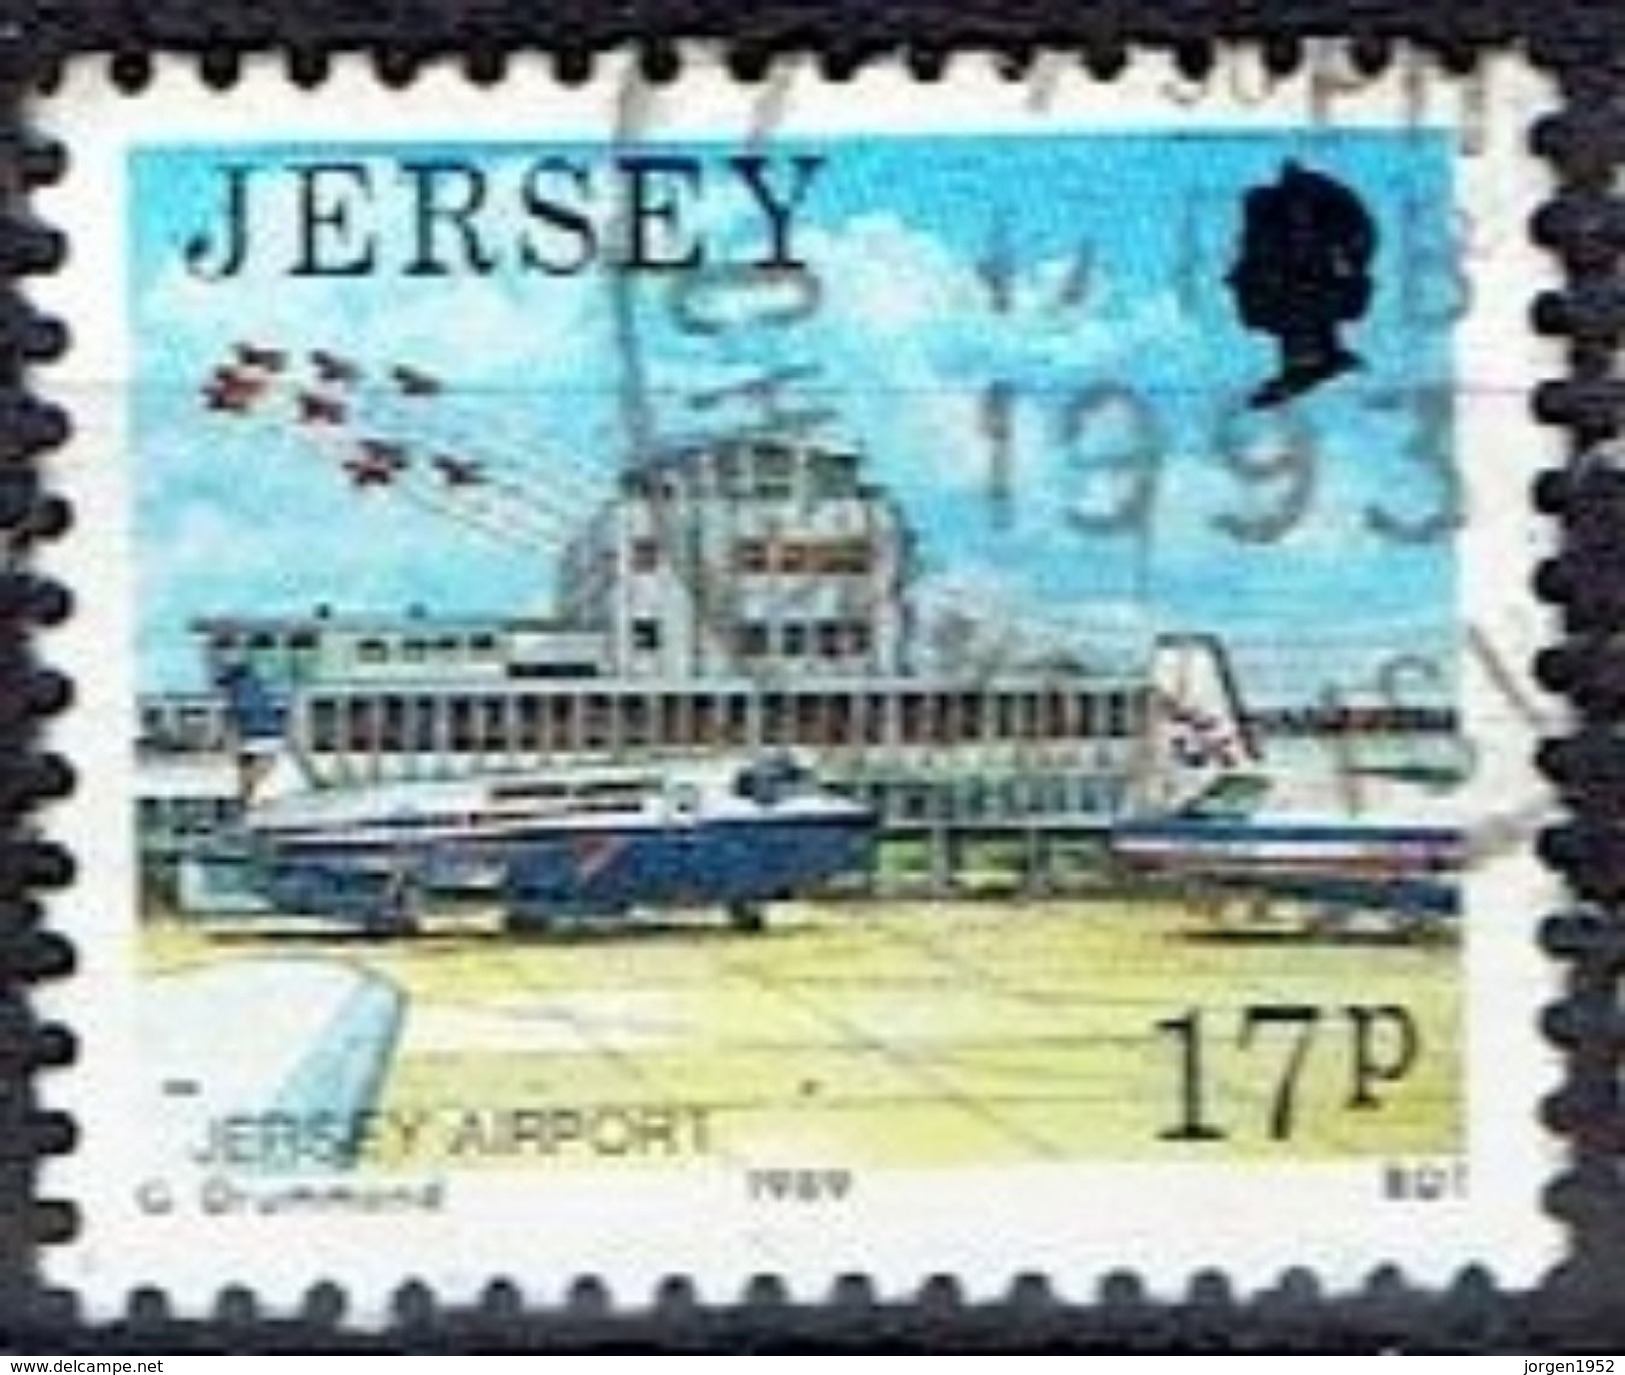 JERSEY  # FROM 1989  STAMPWORLD 466 - Jersey